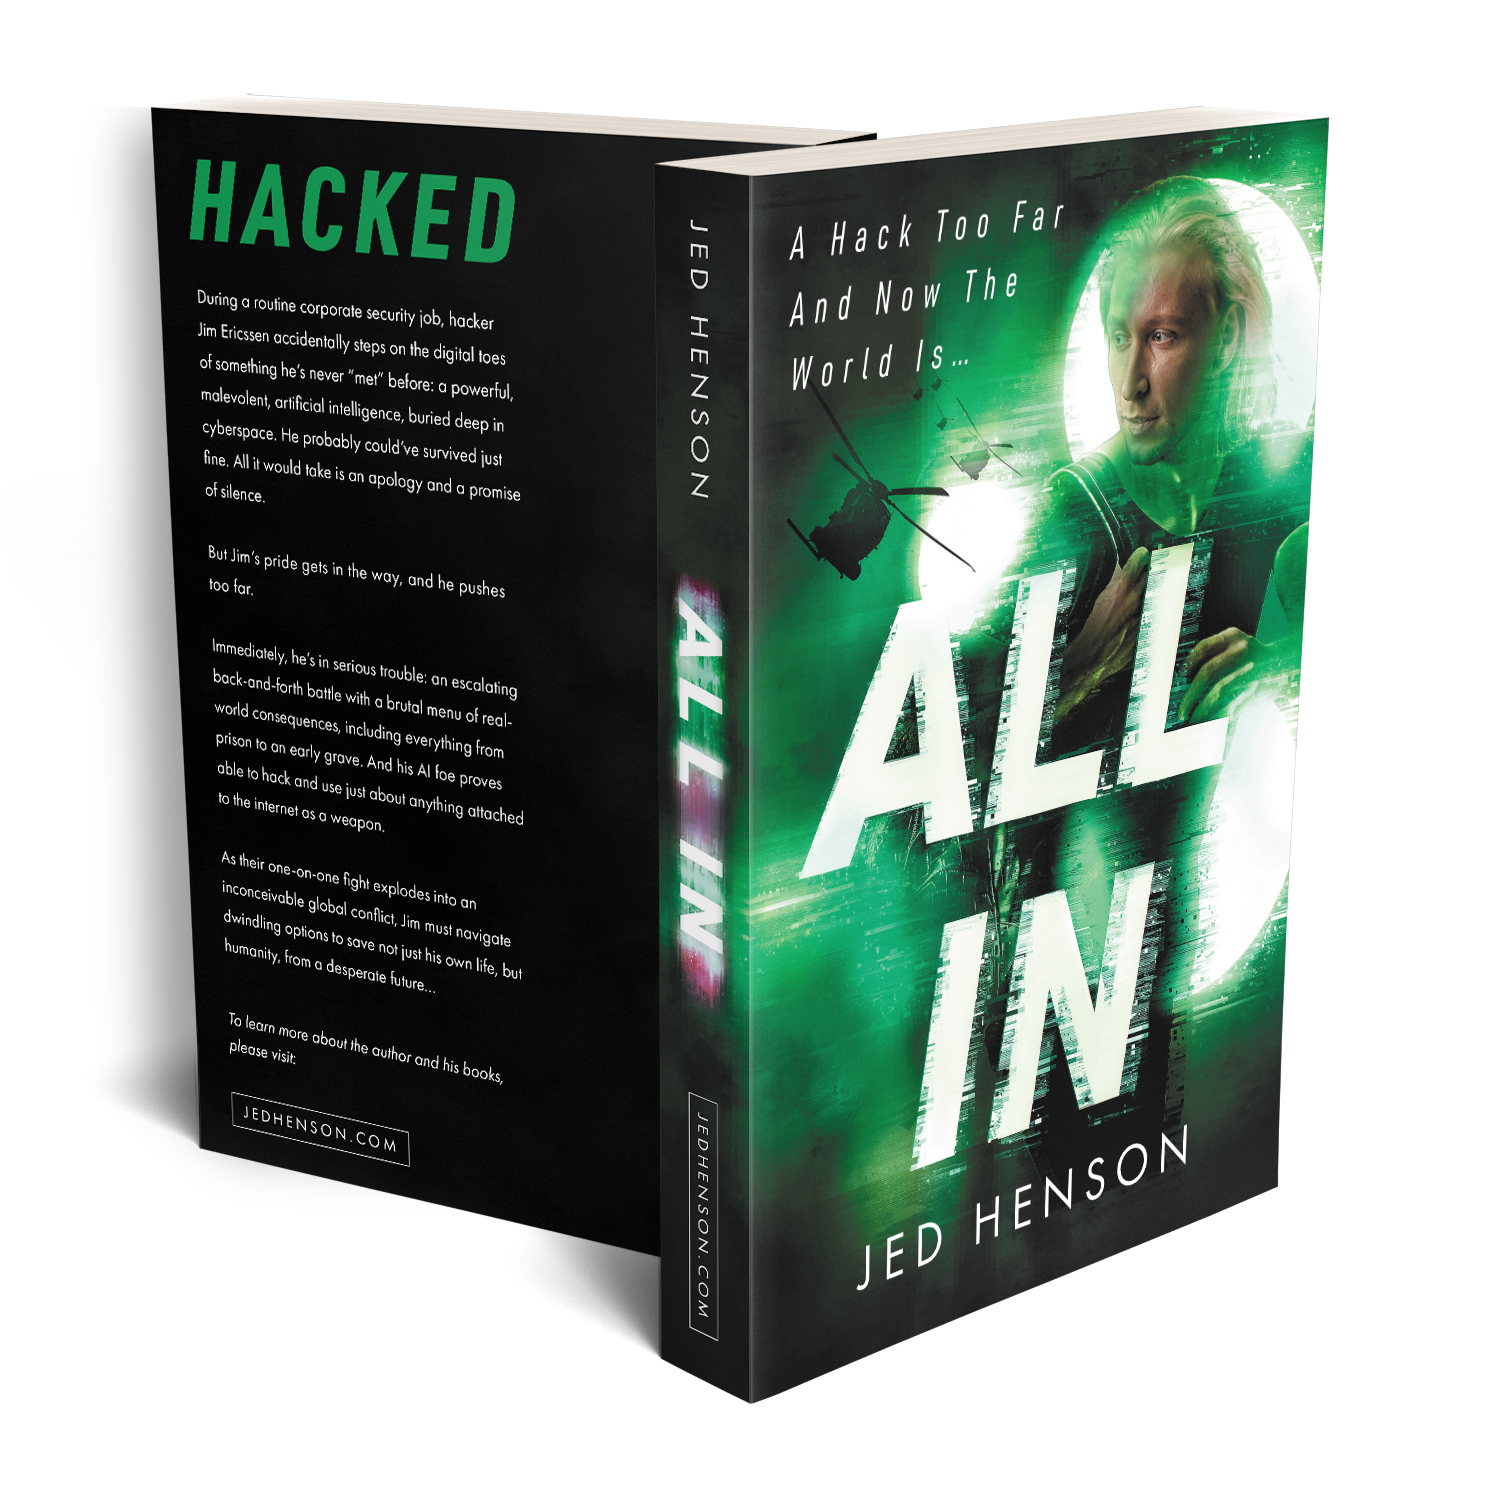 'All In' is a superior cyberthriller novel. The author is Jed Henson. The book cover and interior formatting are designed by Mark Thomas of coverness.com. To find out more about my book design services, please visit www.coverness.com